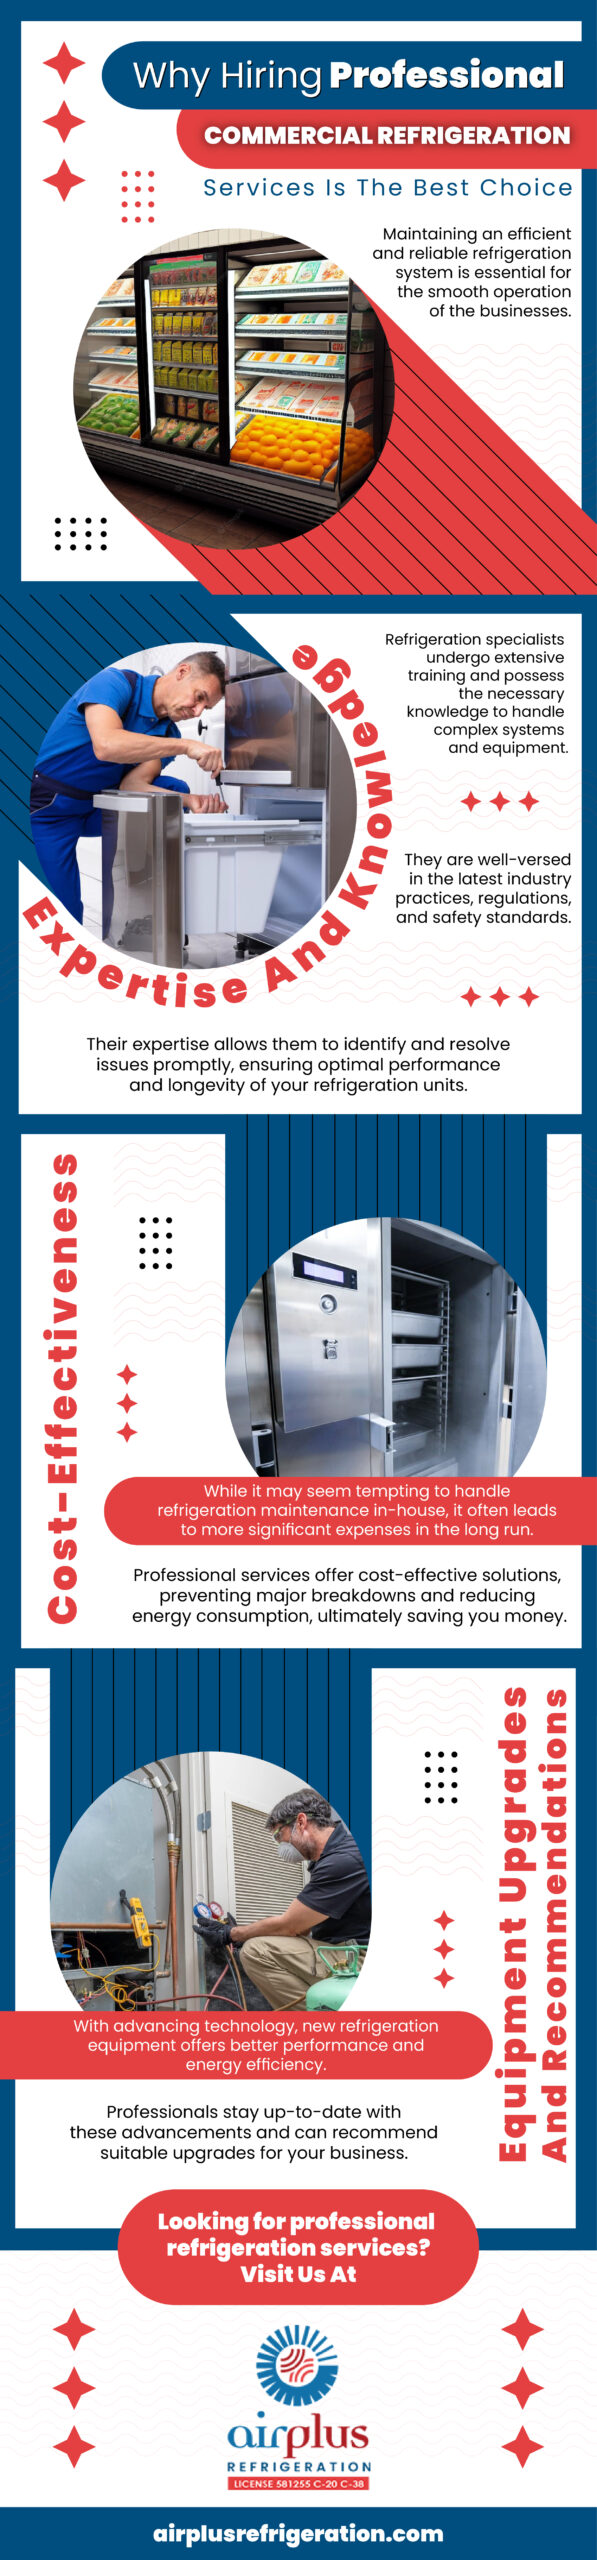 Why Hiring Professional Commercial Refrigeration Services Is The Best Choice